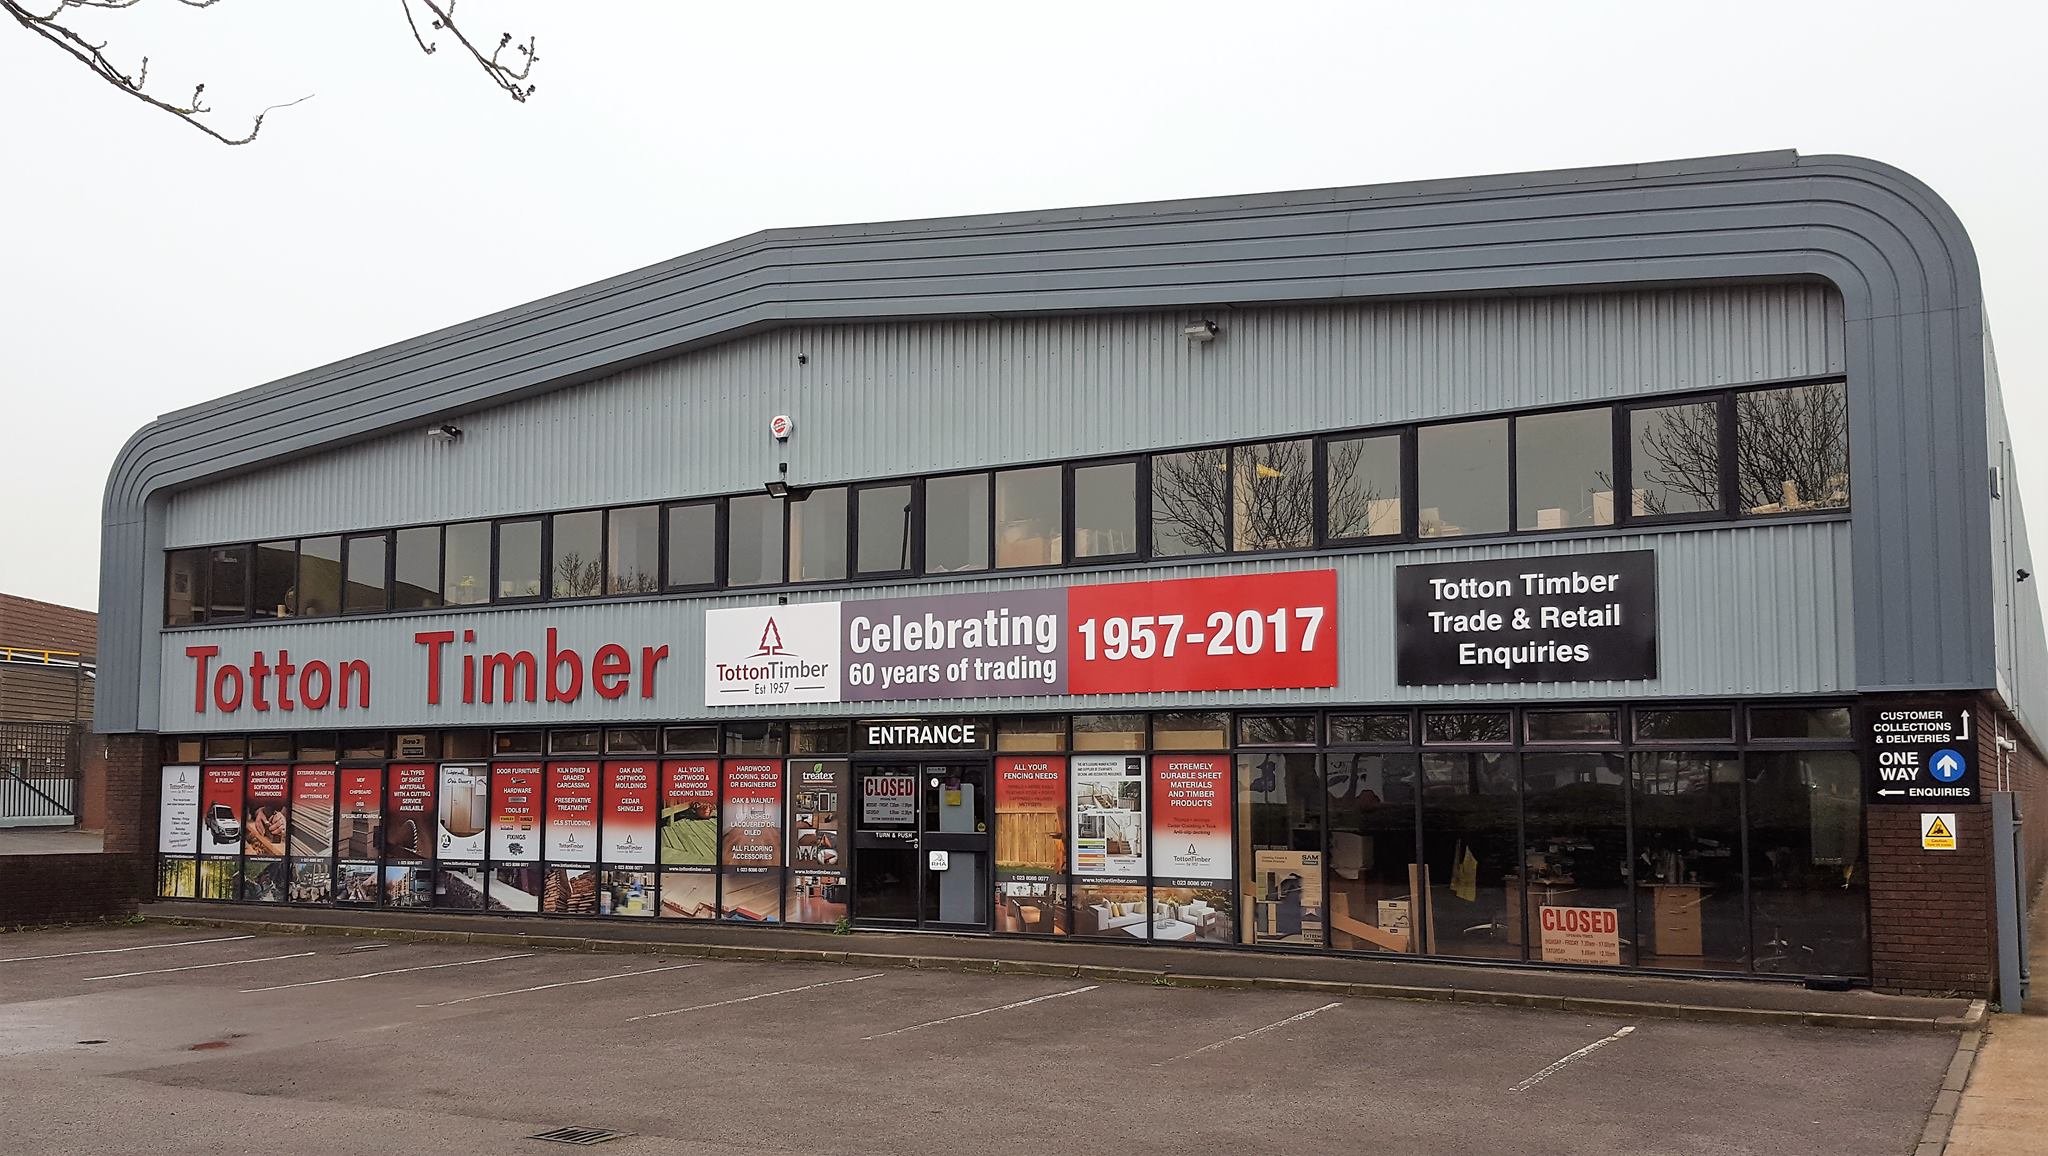 Building of Totton Timber